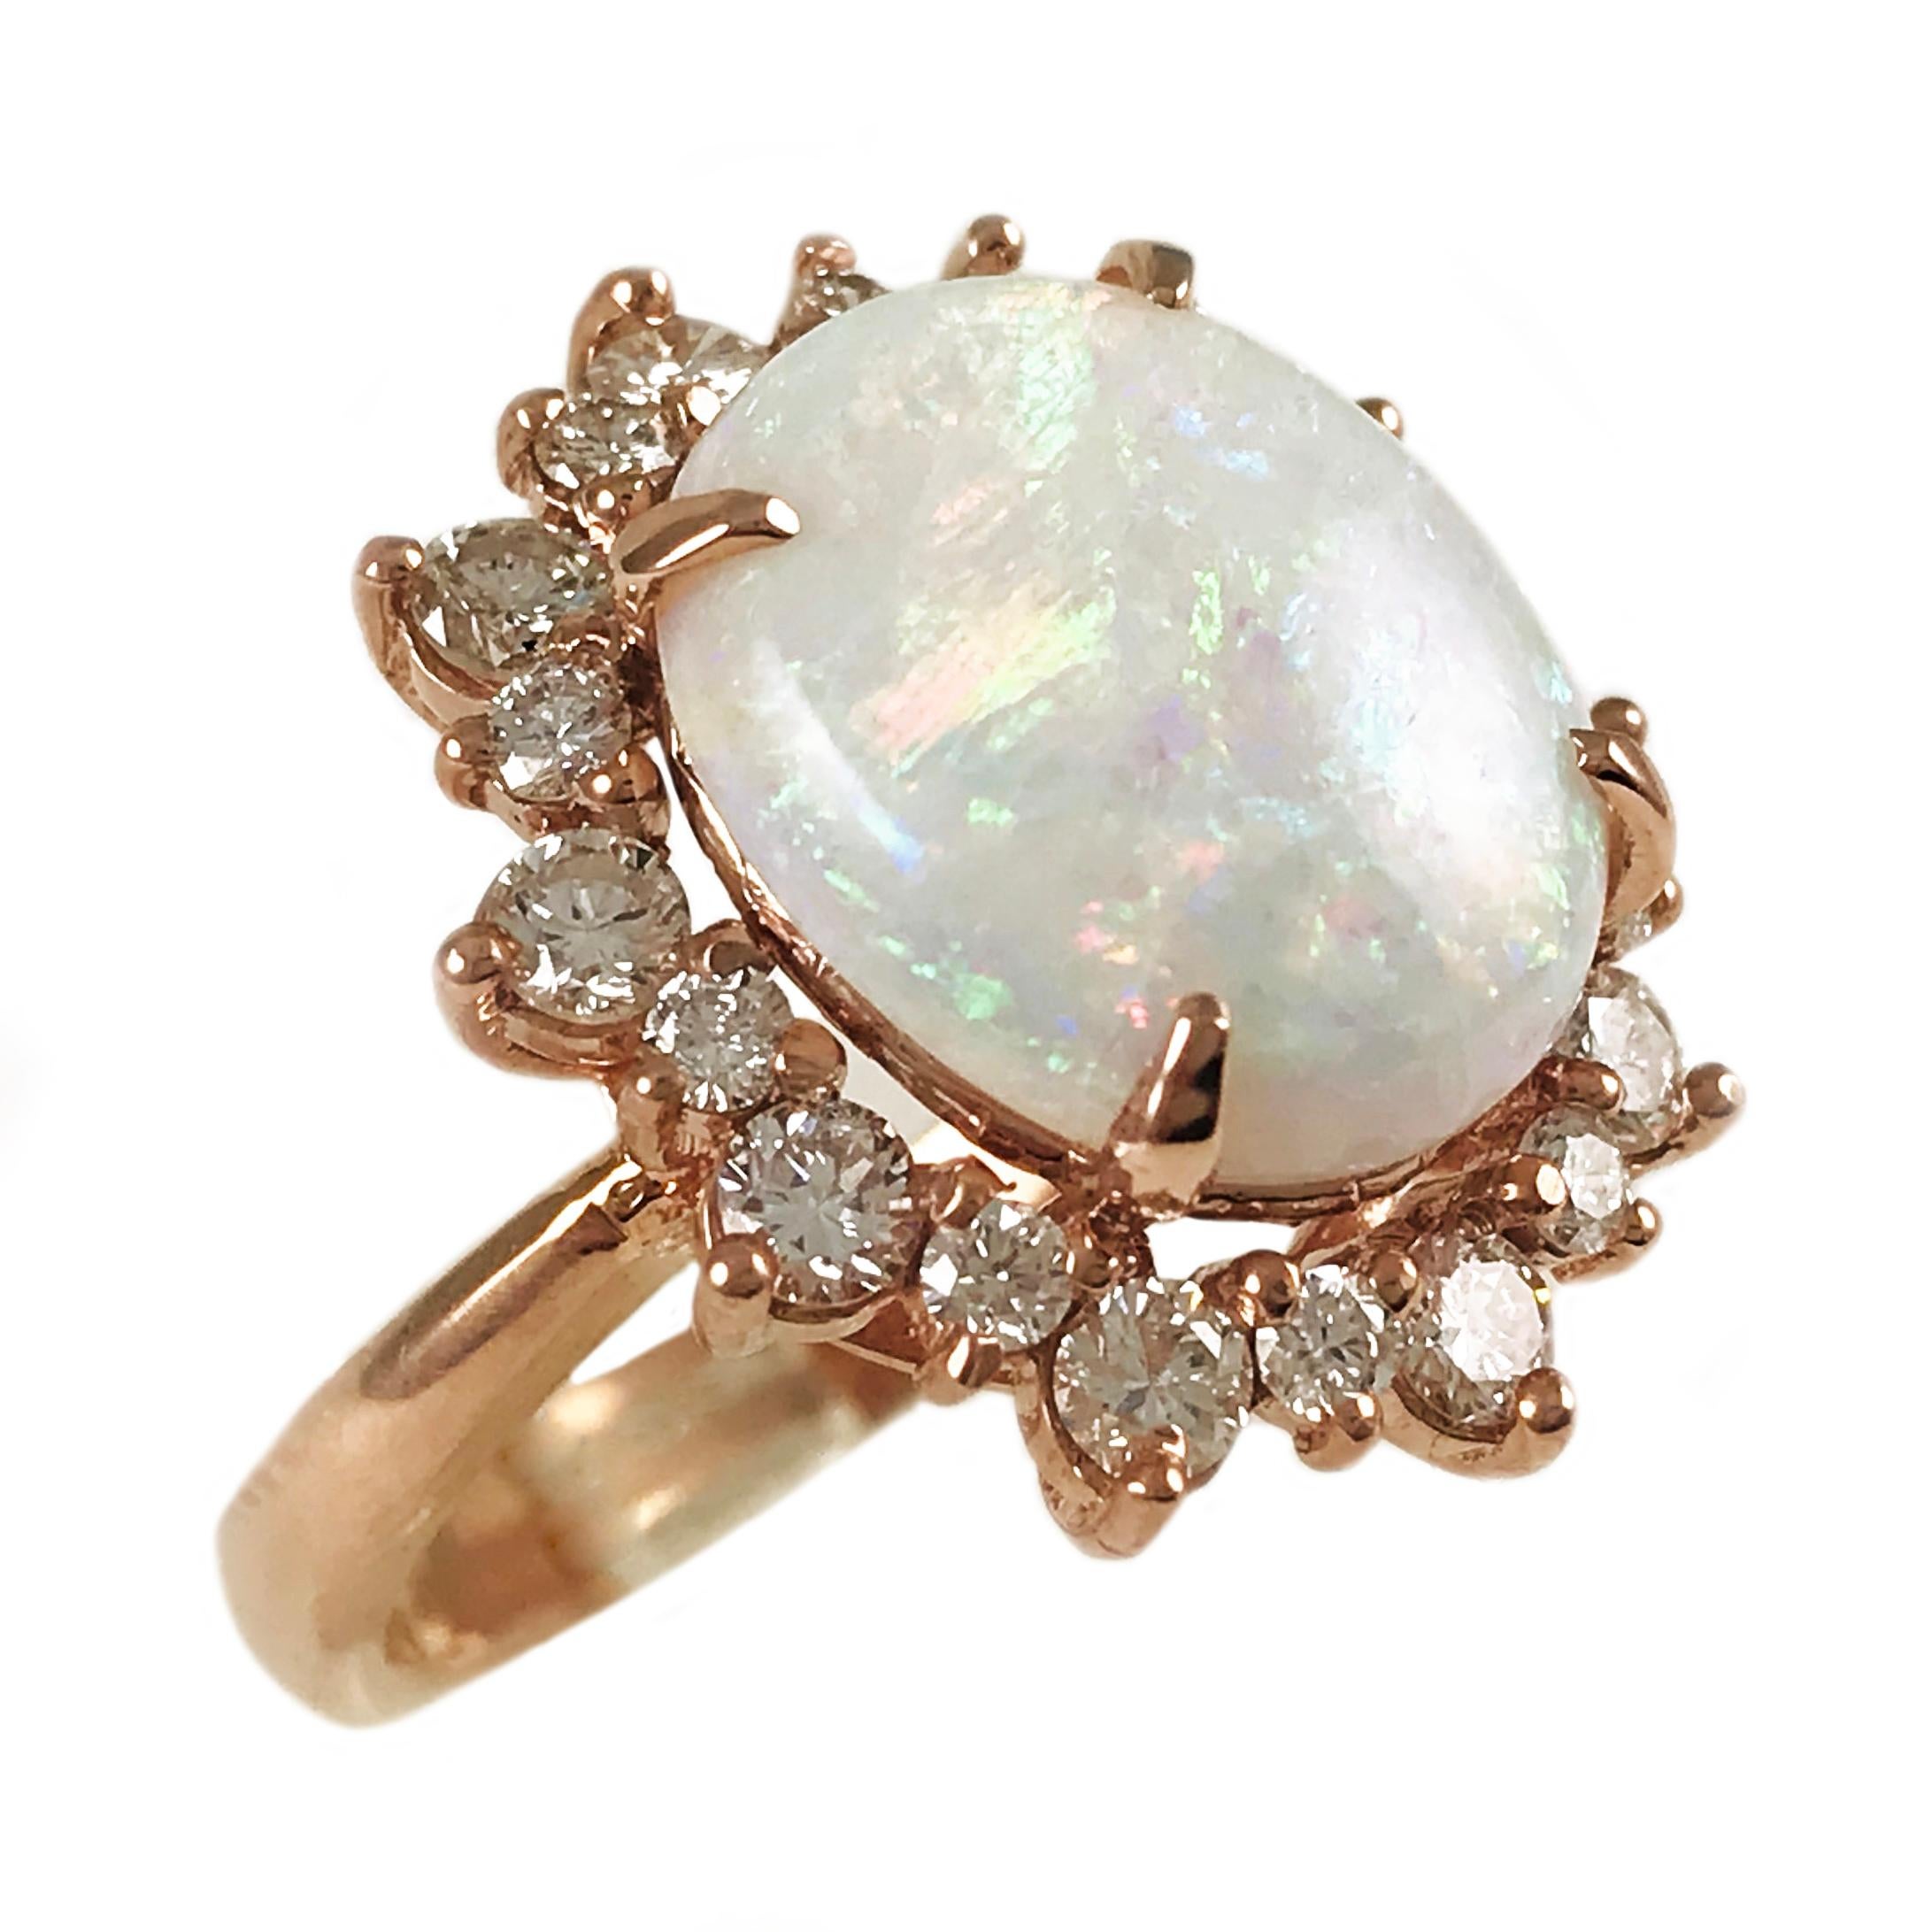 14 Karat Rose Gold natural untreated Opal with Diamond Halo Ring. Opal is 14 x 11.5 x 5mm and has a weight of 2.95ct. The intense beautiful greens and pinks in the play of color is exquisite. The diamond halo consists of twenty single-cut diamonds,